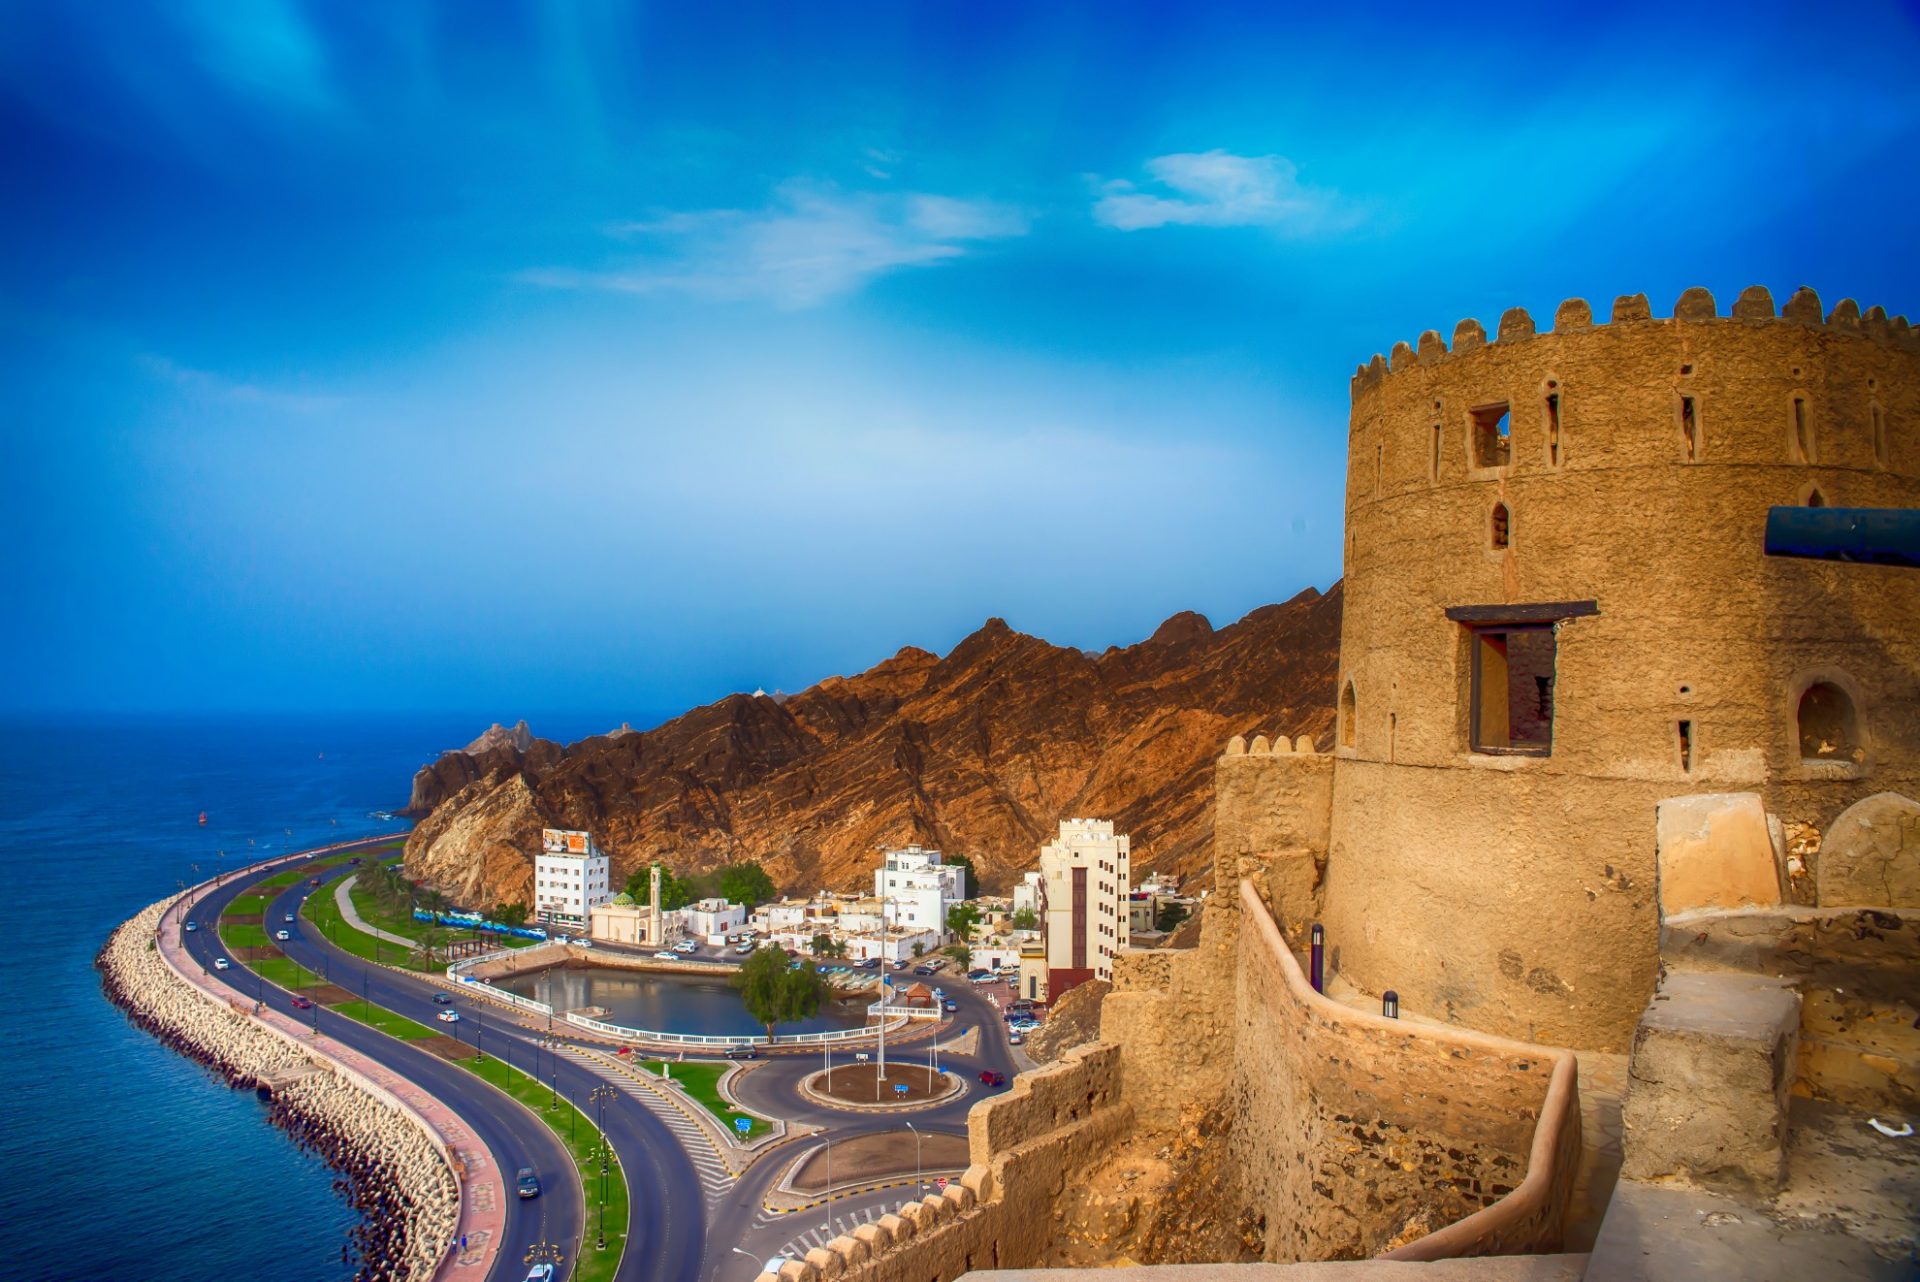 tours to oman from uk